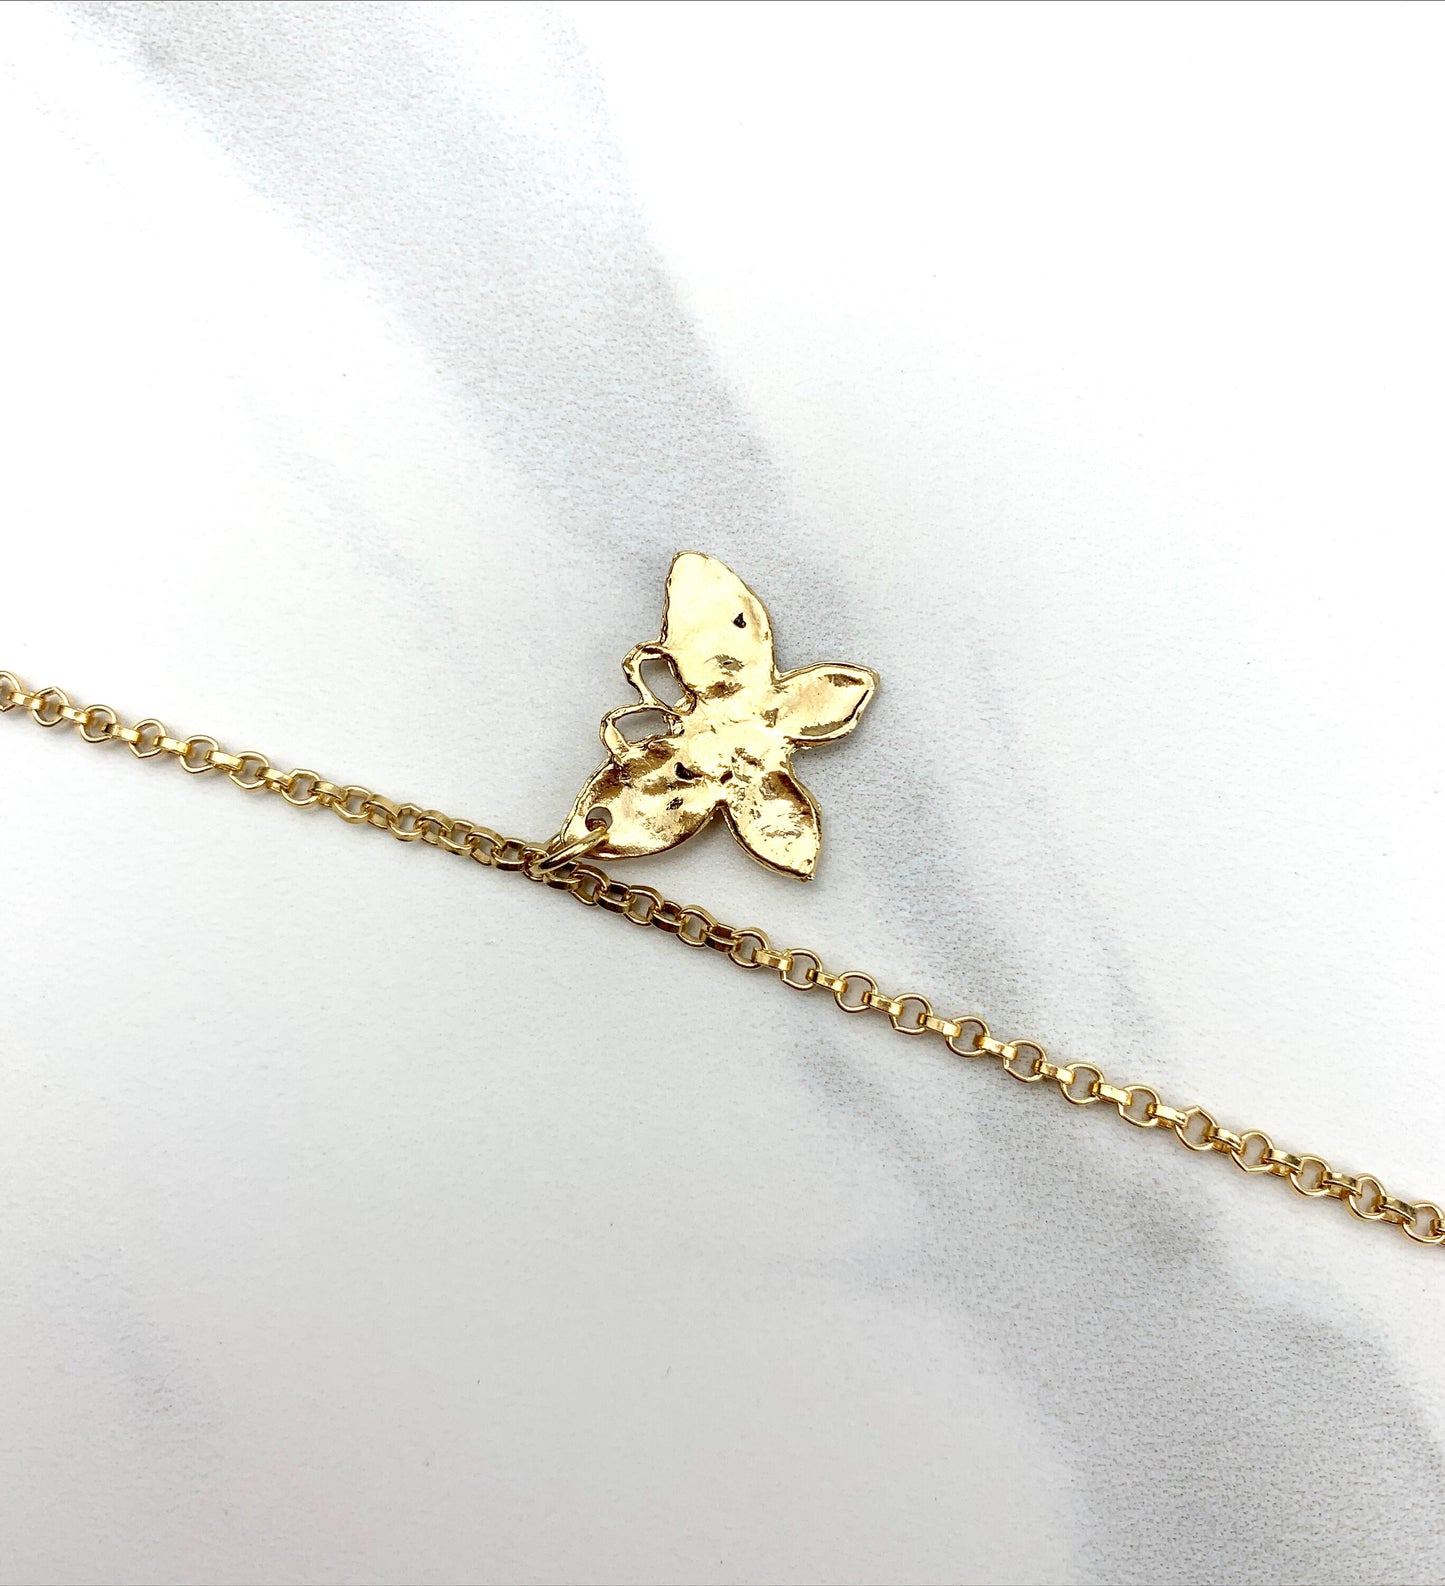 18k Gold Filled 2mm Rolo Chain with Clear Cubic Zirconia Butterfly Shape Design Charm Anklet, Wholesale Jewelry Making Supplies